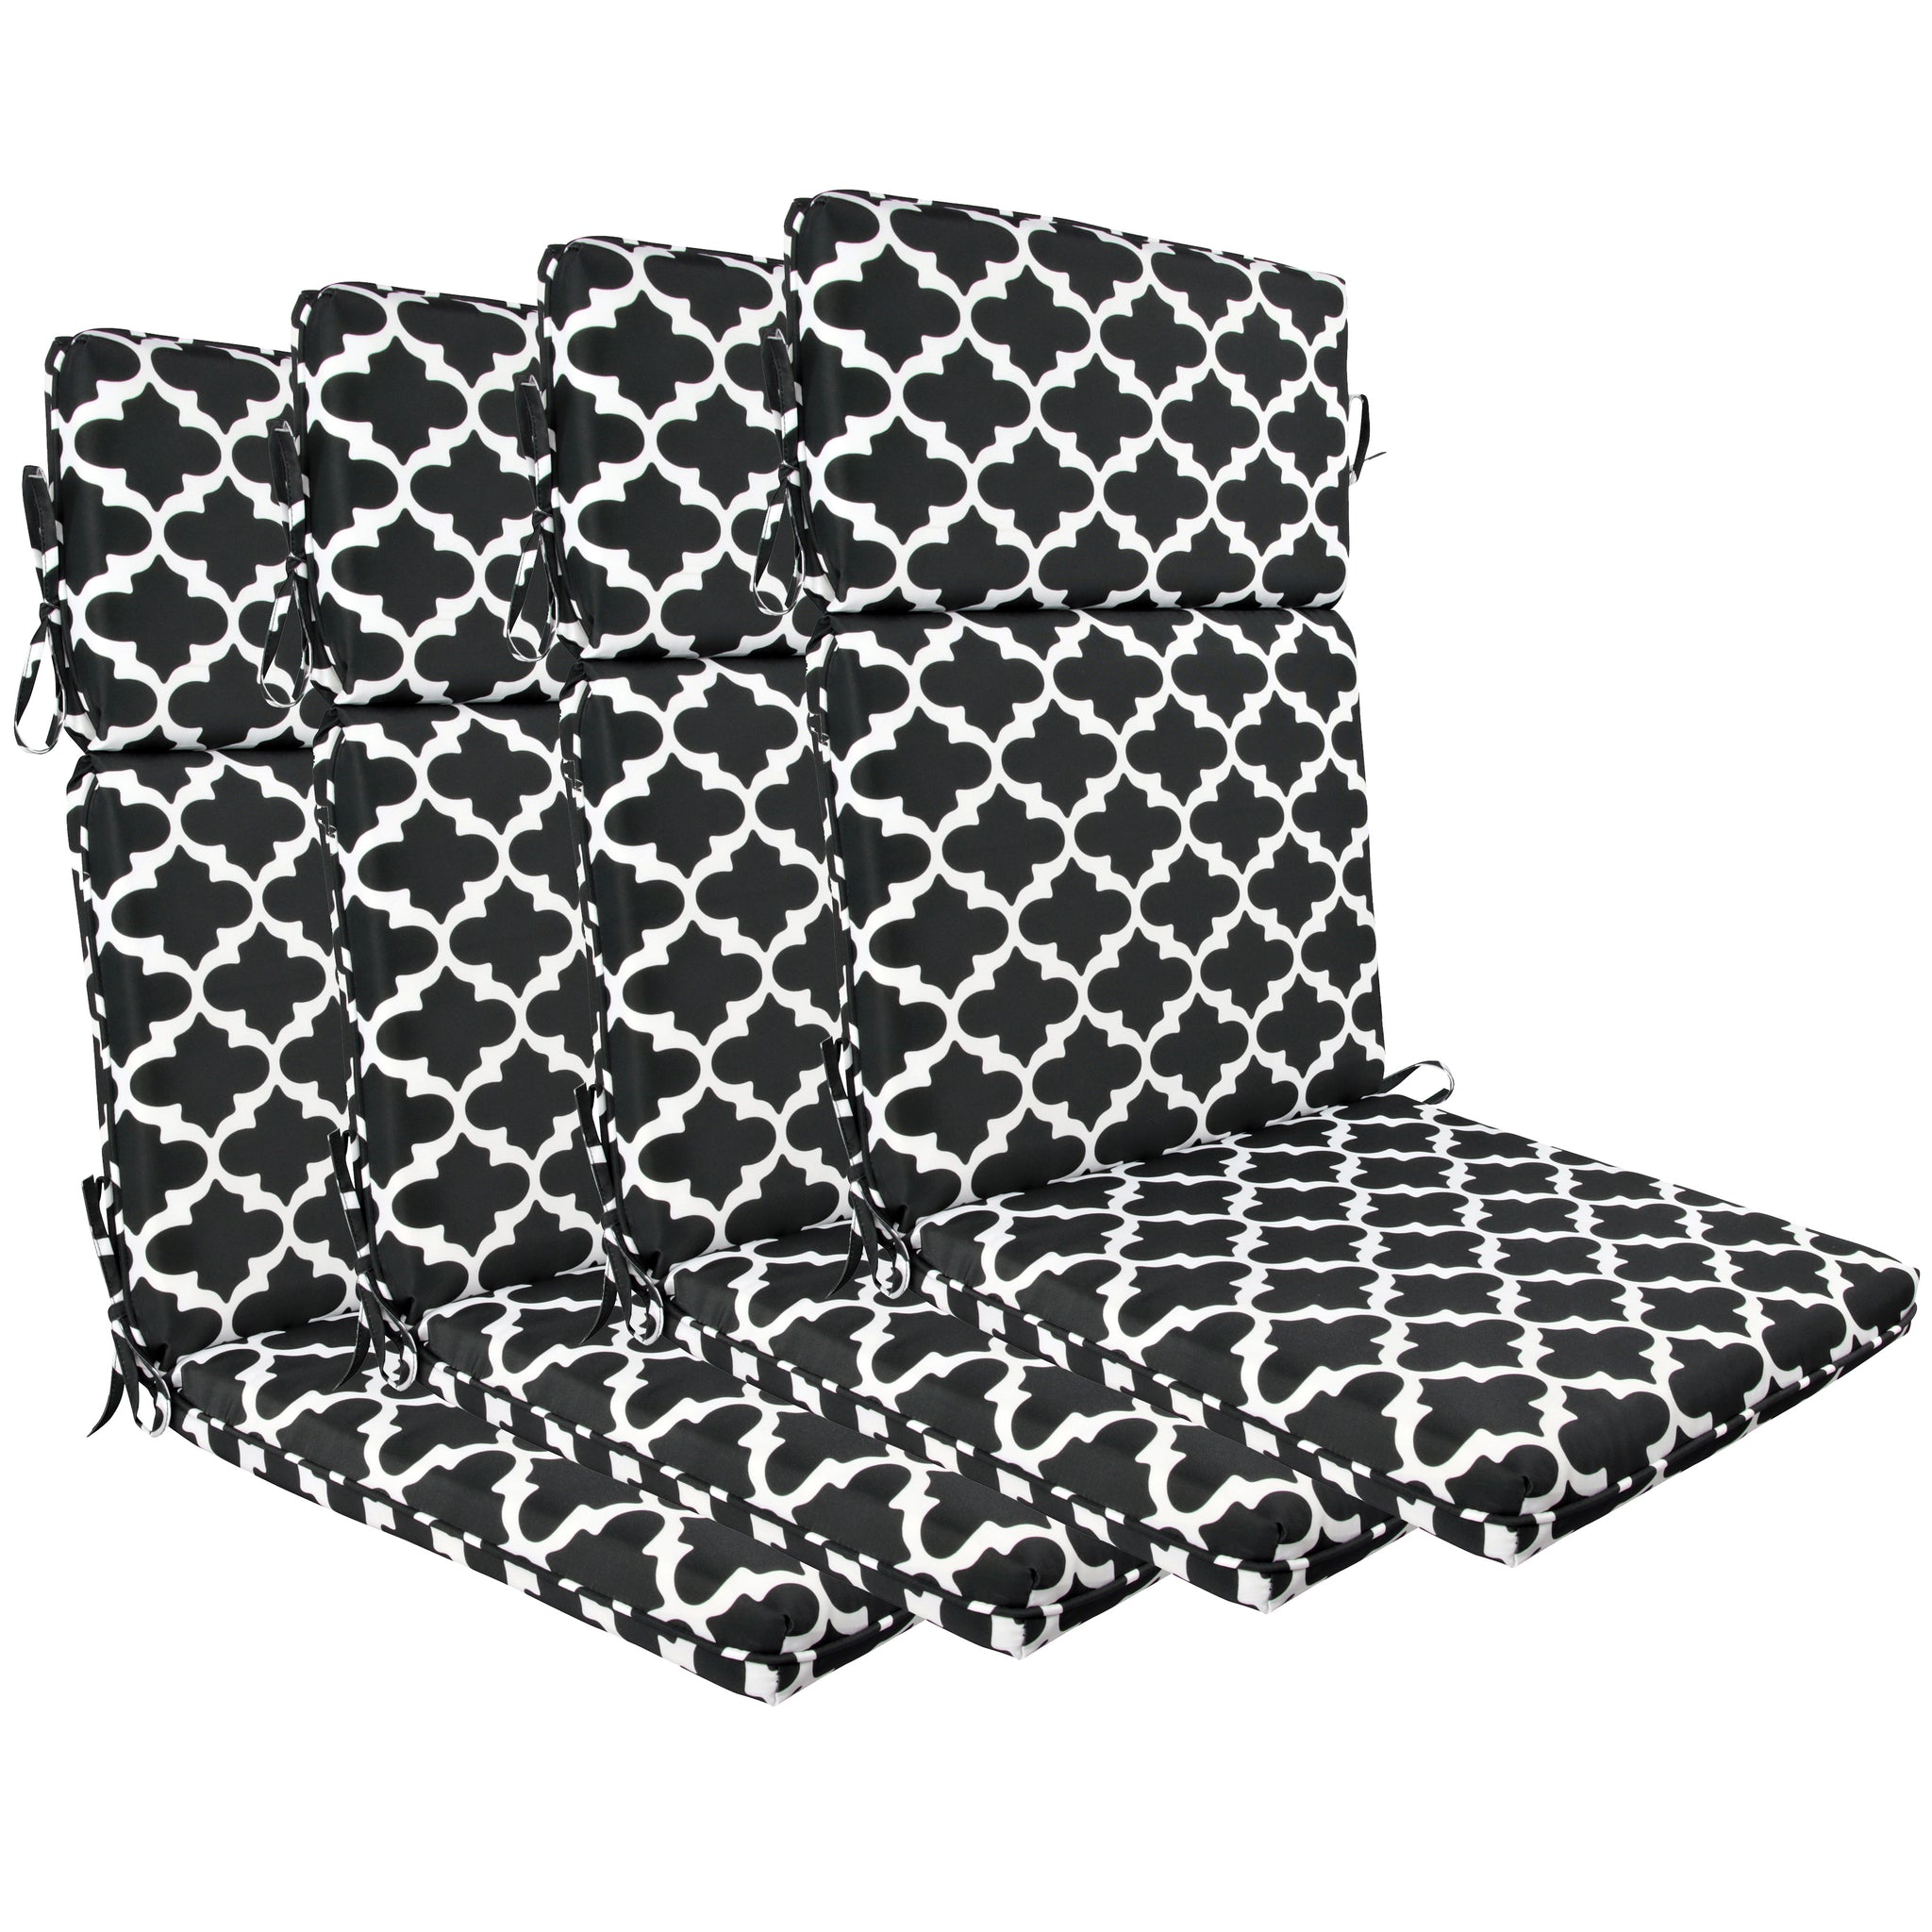 Indoor Outdoor High Back Chair Cushions Set of 4 Black & White Flower